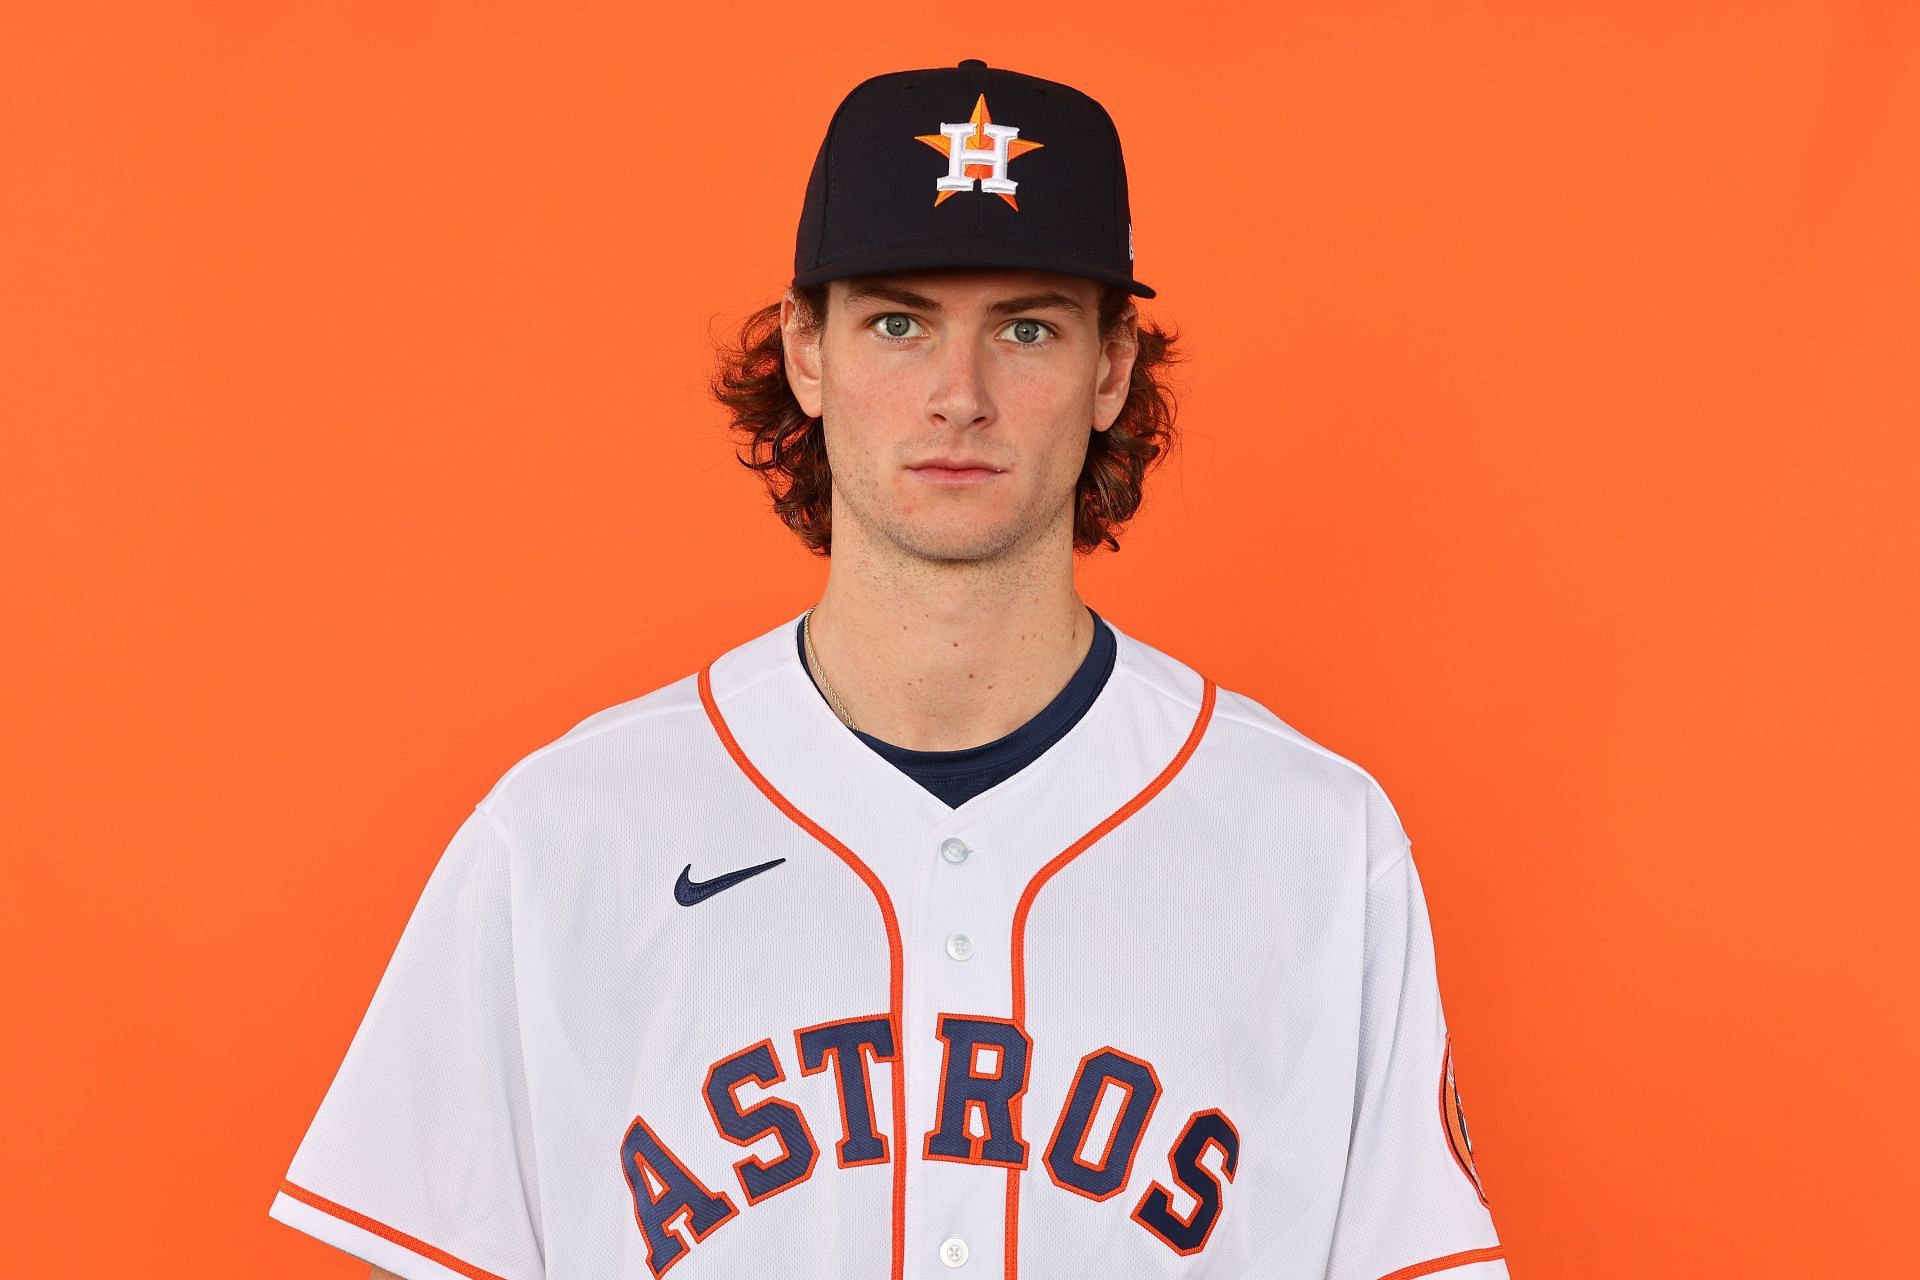 Astros Prospect Will Wagner Continues Breakout Showing In Arizona